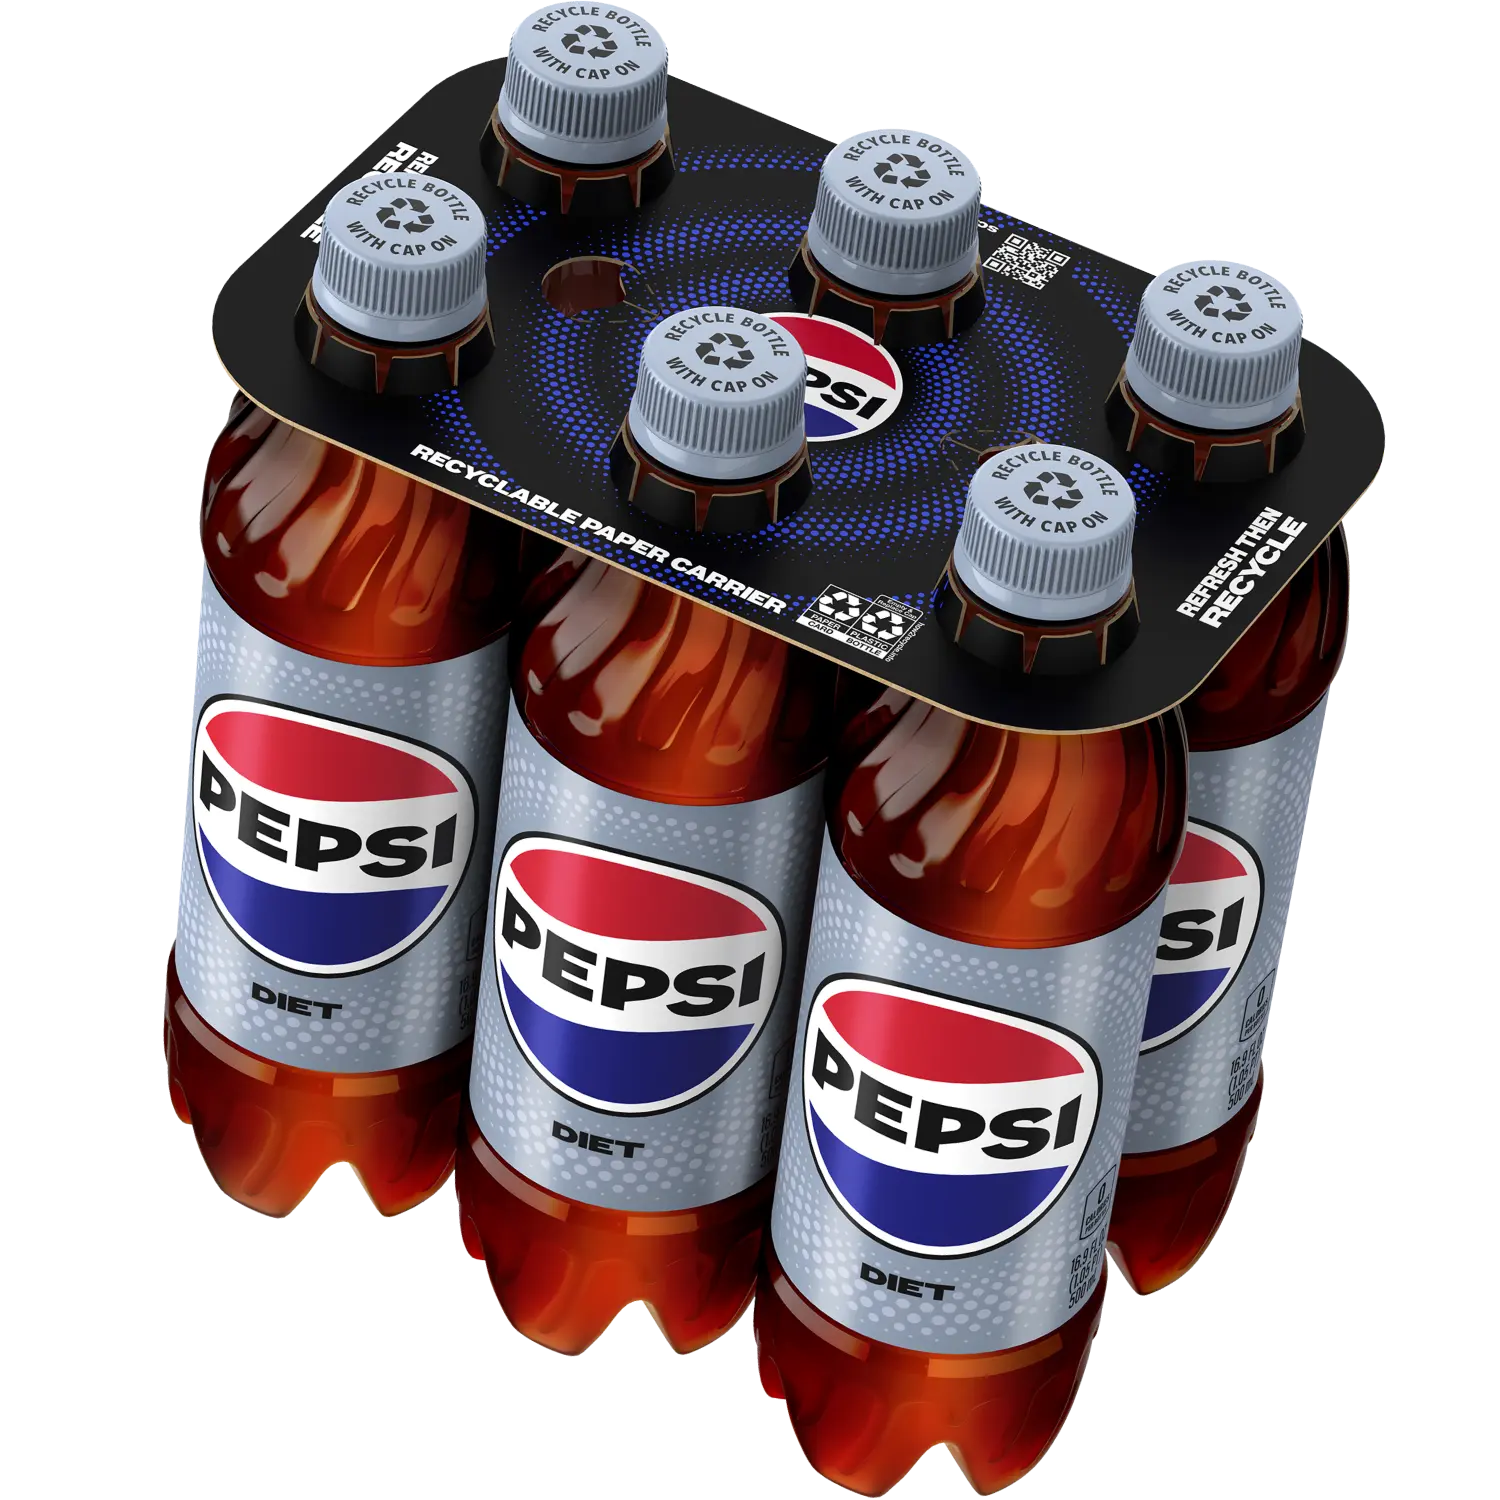 6 pack of Diet Pepsi bottles with a recyclable paper carrier